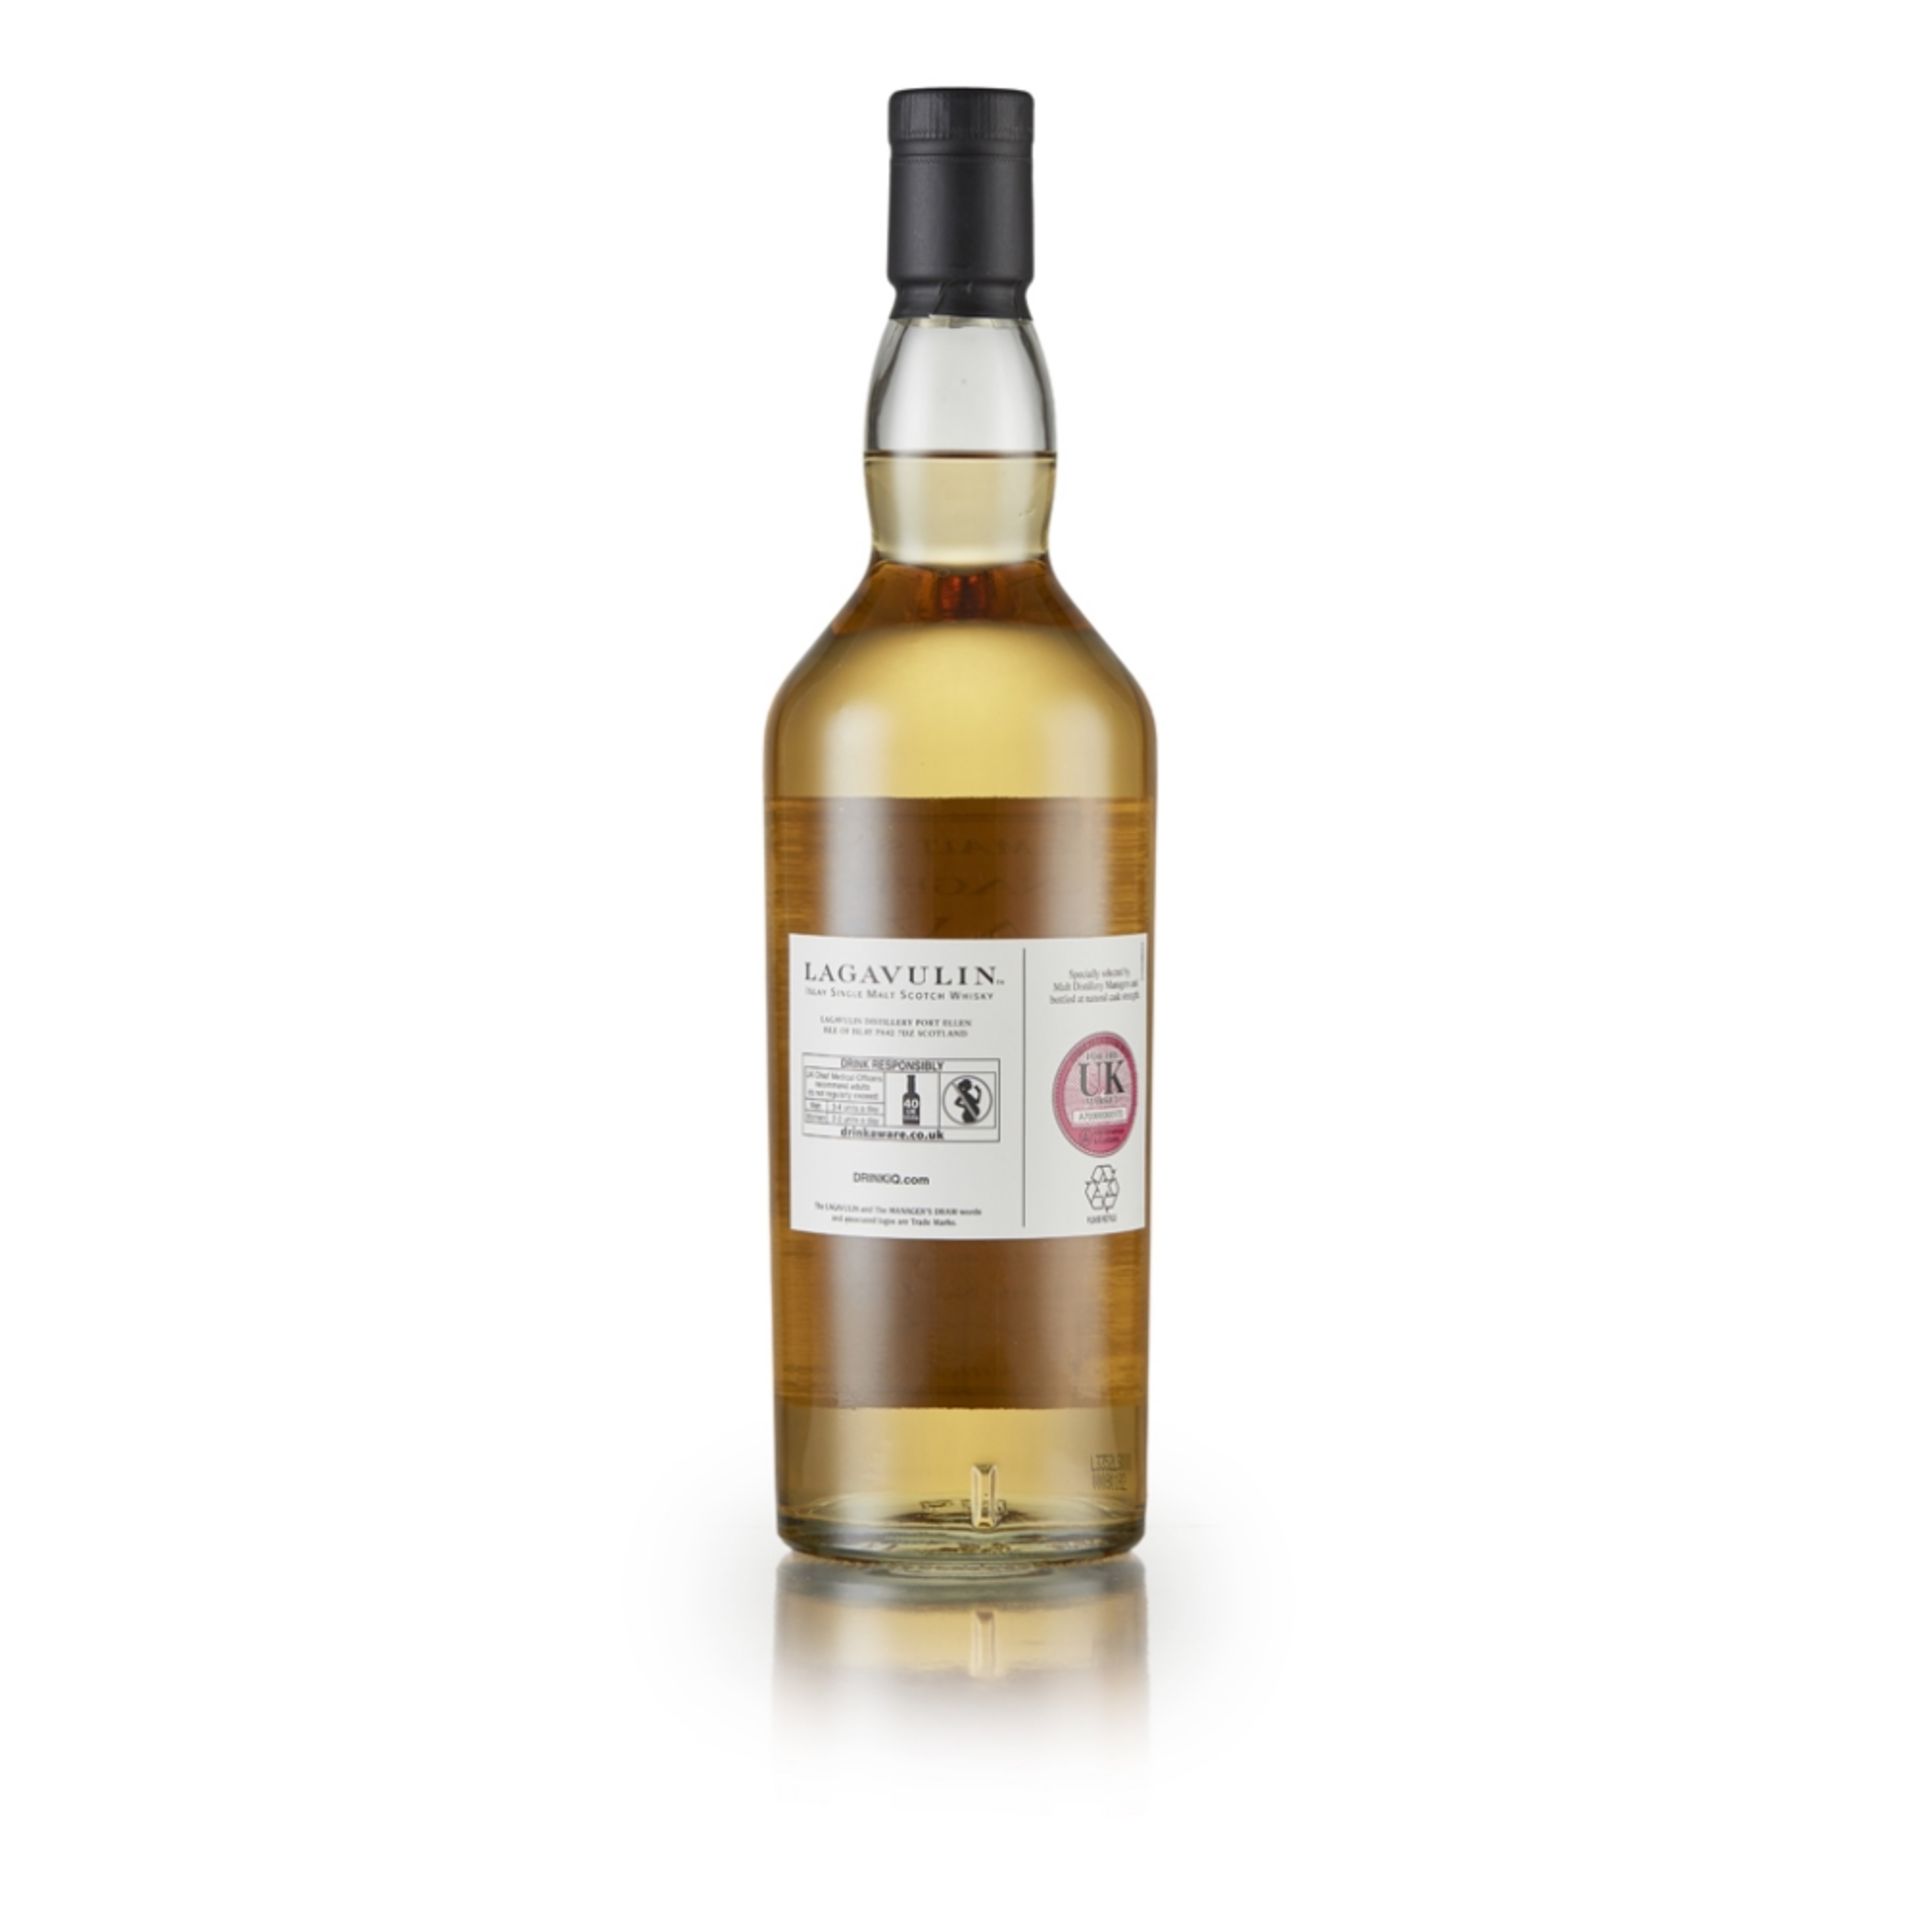 LAGAVULIN 11 YEAR OLD - THE MANAGER'S DRAM DISTILLERY ACTIVE bottle number 702 70cl/ 57.1% - Image 2 of 2